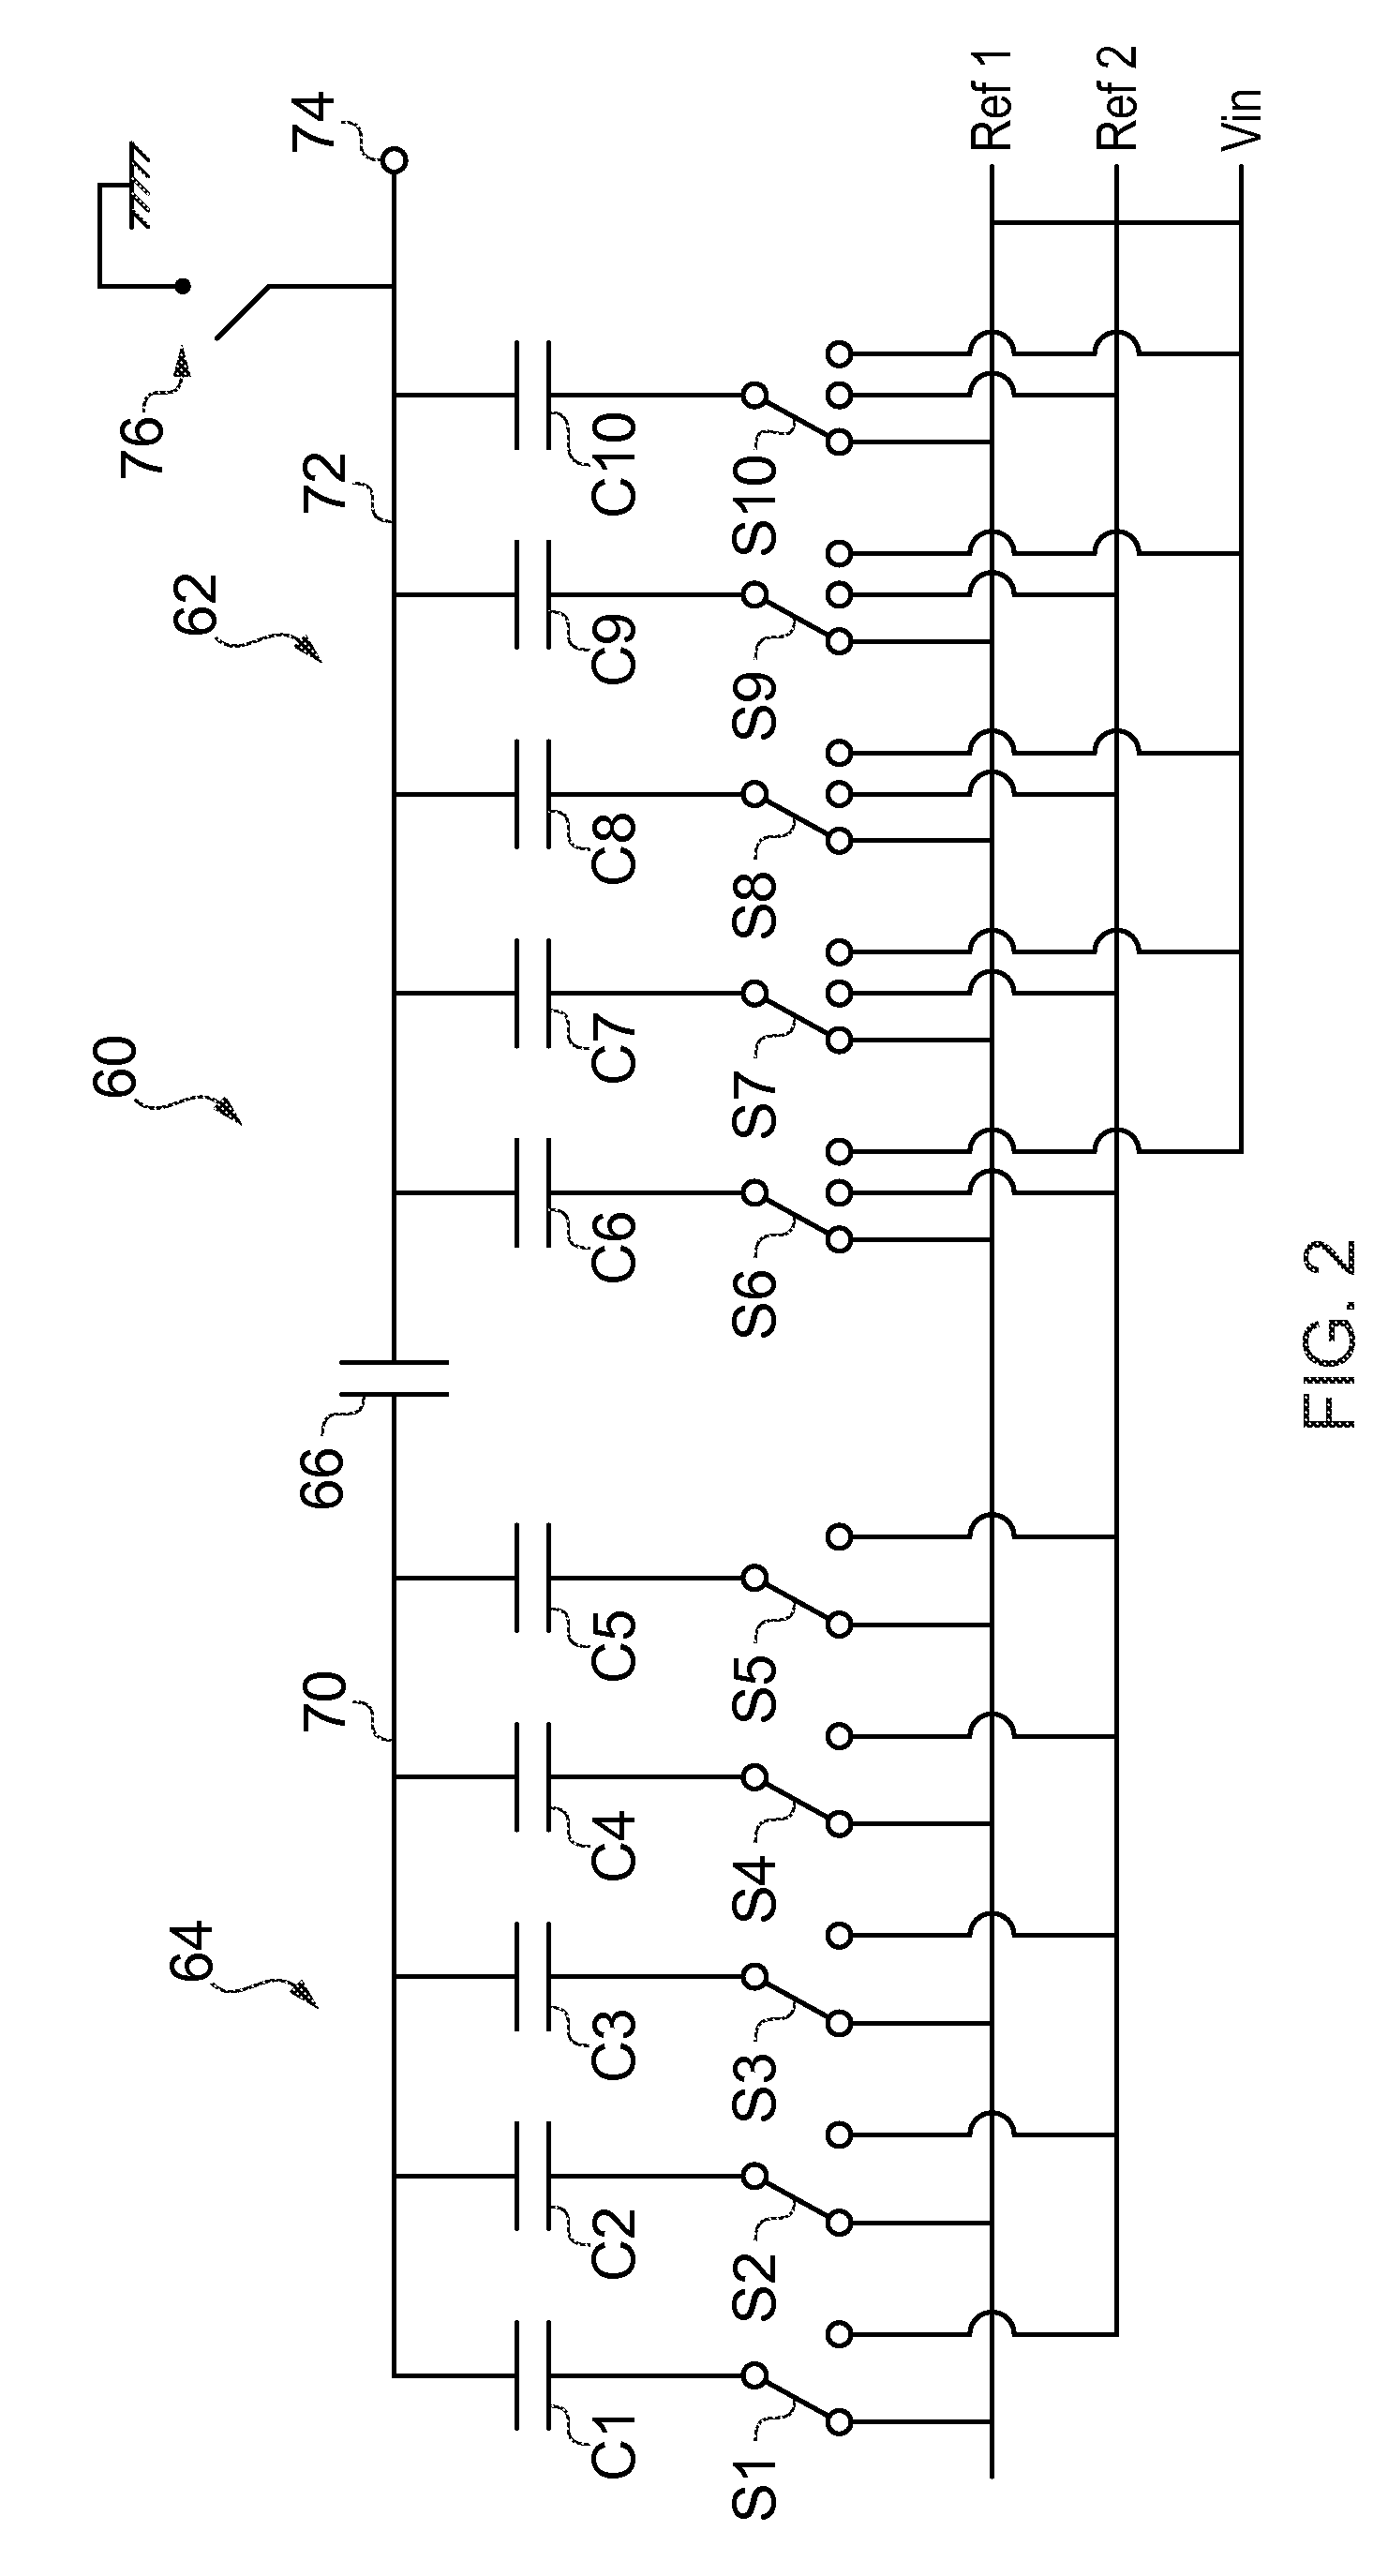 Apparatus for and method of performing an analog to digital conversion